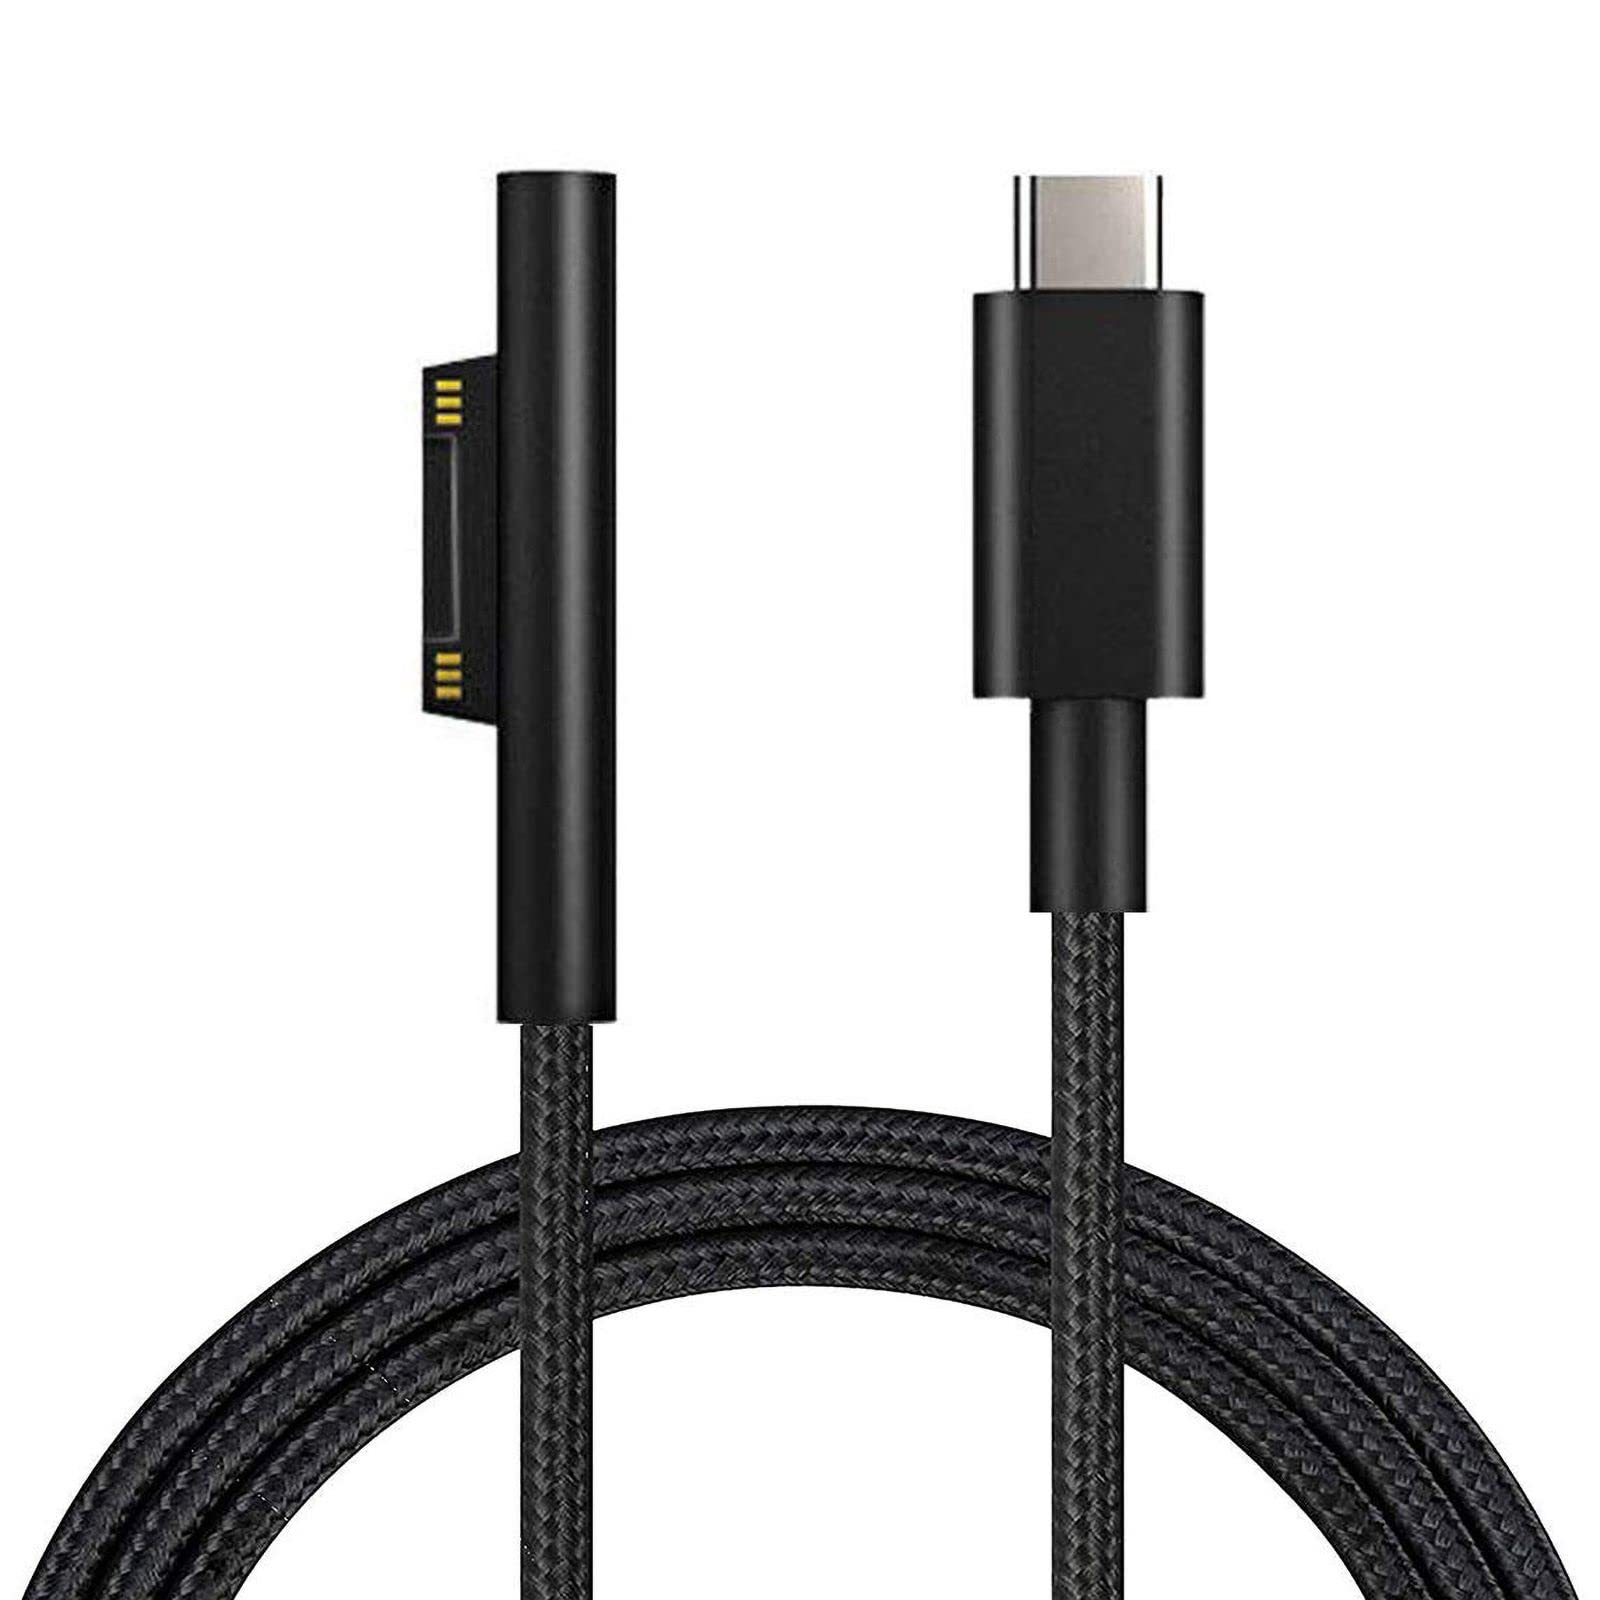 Surface Pro 5 being disconnected from charging cable